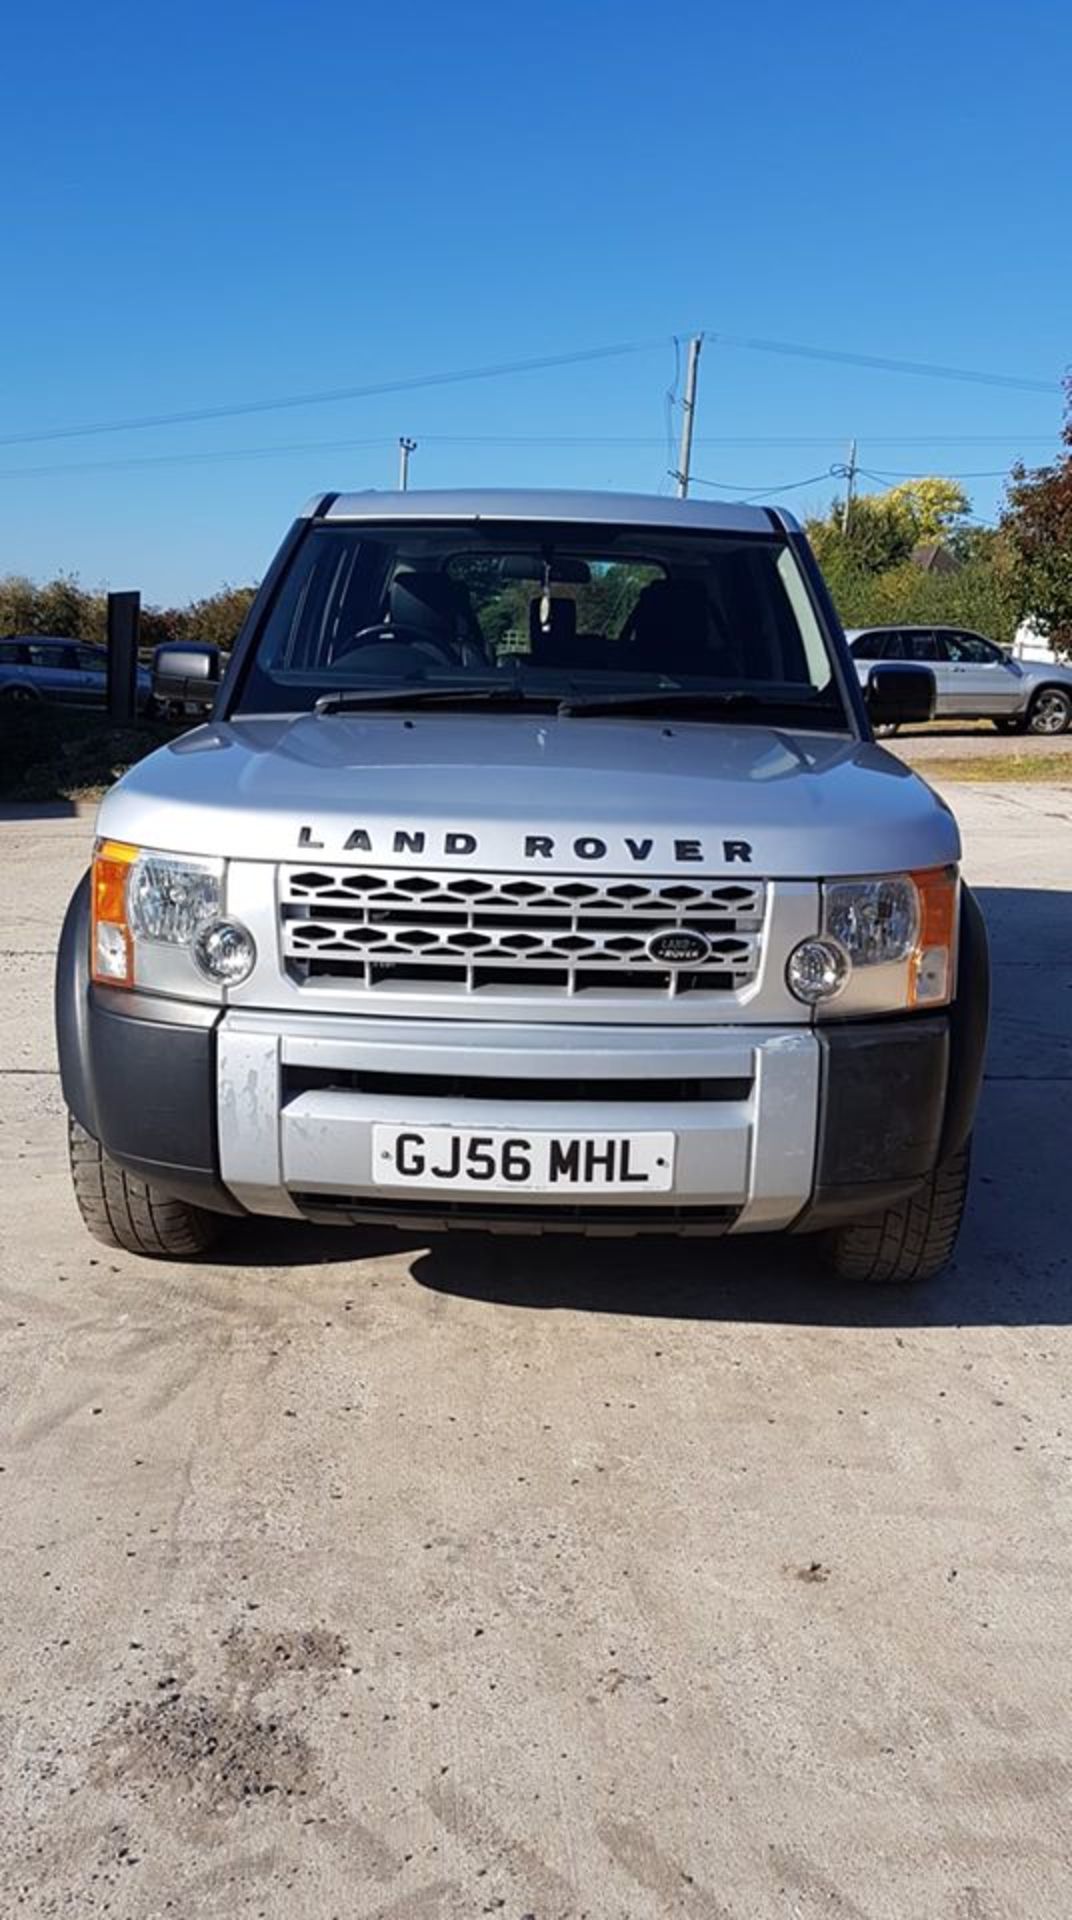 2006 Land Rover Discovery 3TDv6 Auto - Image 6 of 9